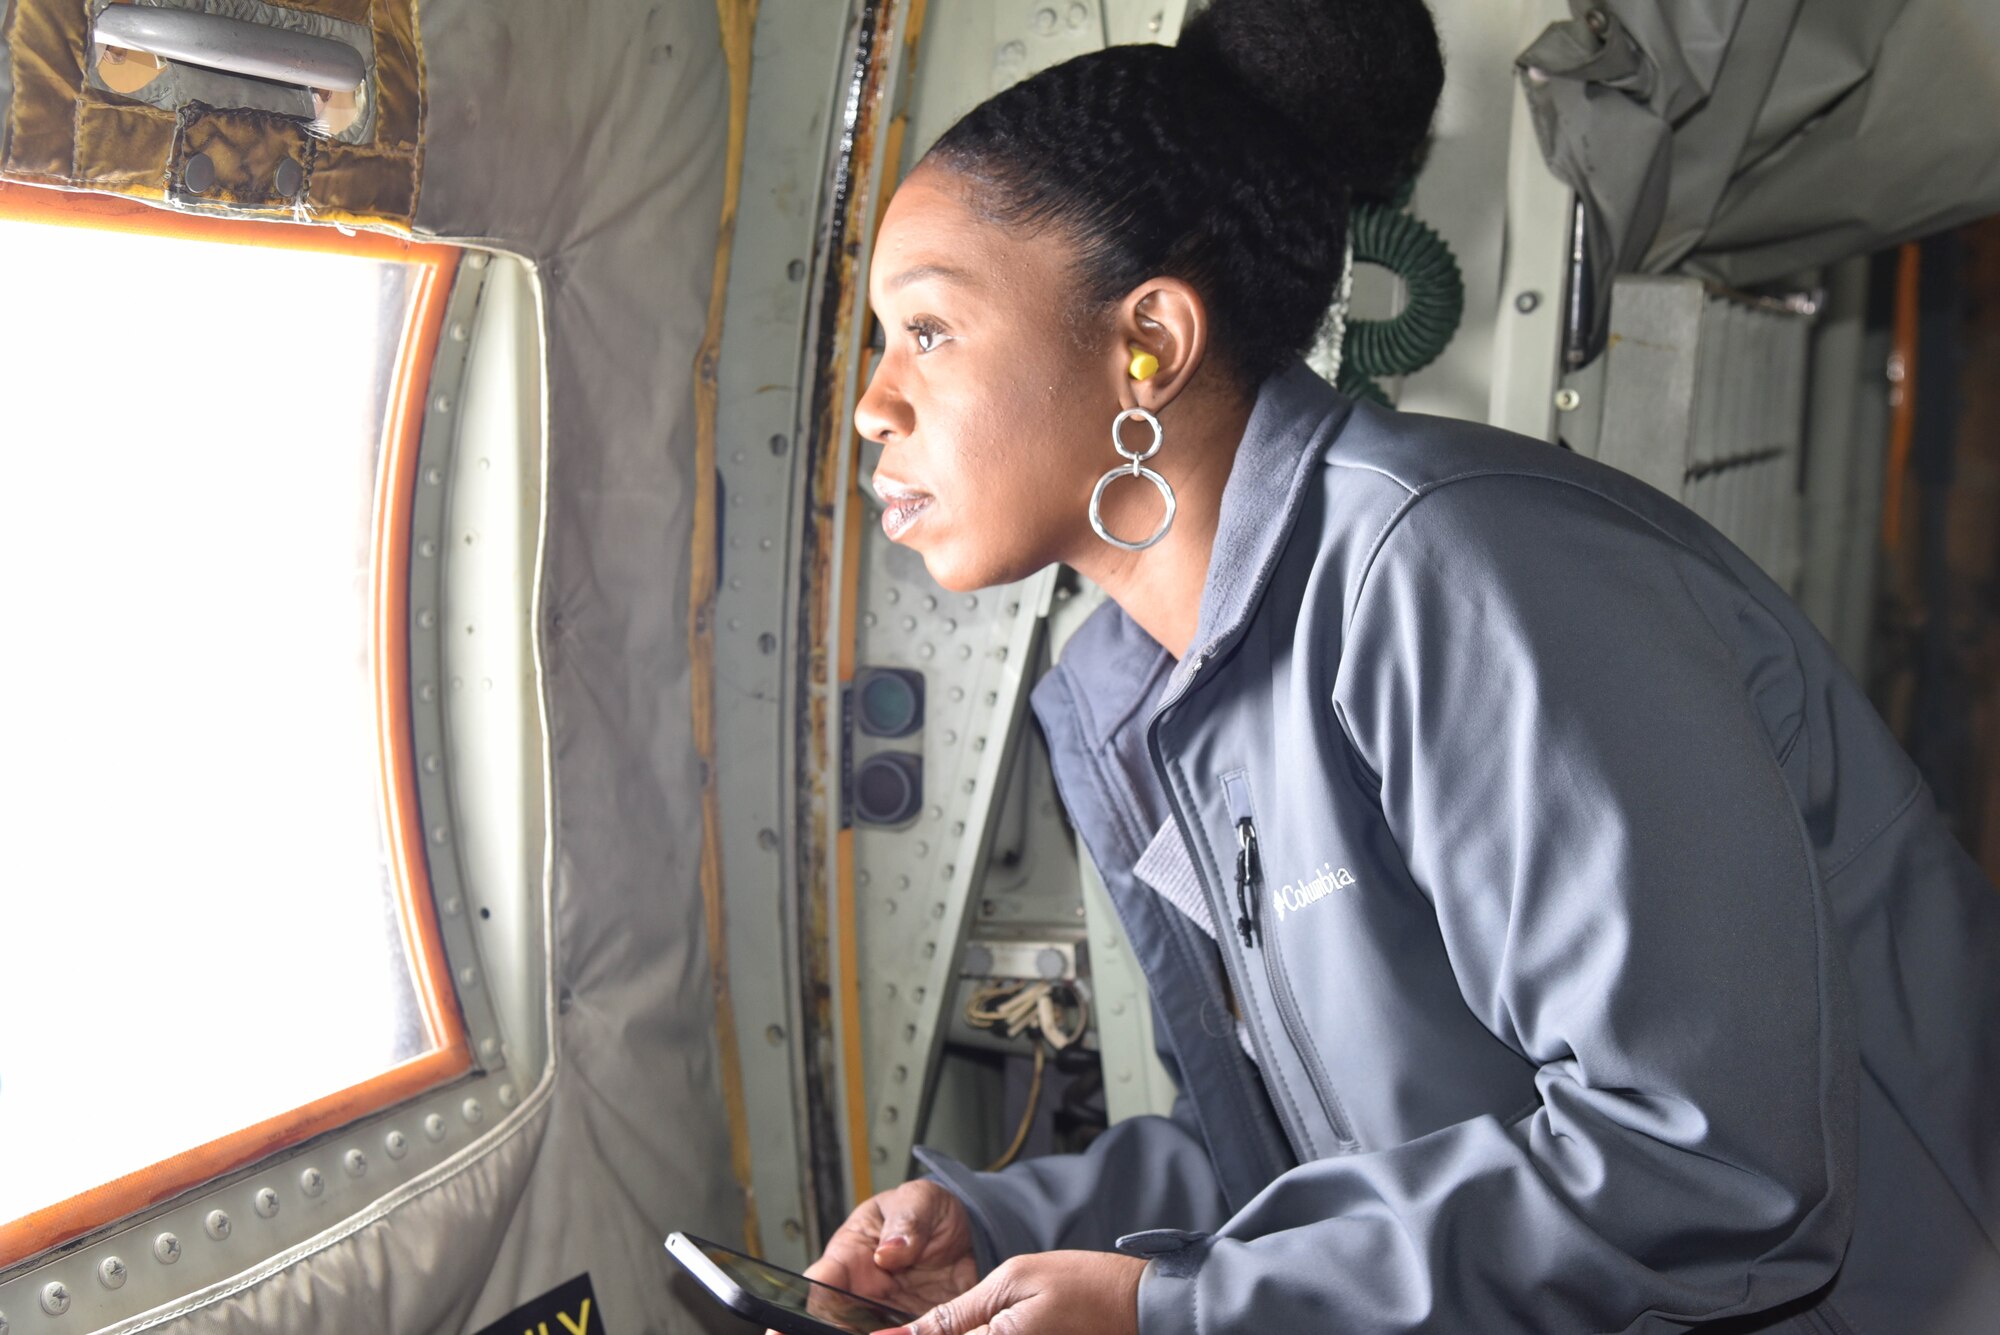 Tiffany Bell, Women's Resource Center Executive Director and 81st Training Wing Honorary Commander, flew on a training mission with the 53rd Weather Reconnaissance Squadron, also known as the Hurricane Hunters, March 8, 2019. Bell, along with her Keesler Honorary Commander counterparts, toured the 403rd Wing, an Air Force Reserve tenant unit on Keesler Air Force Base, Miss. (U.S. Air Force photo by Tech. Sgt. Michael Farrar)